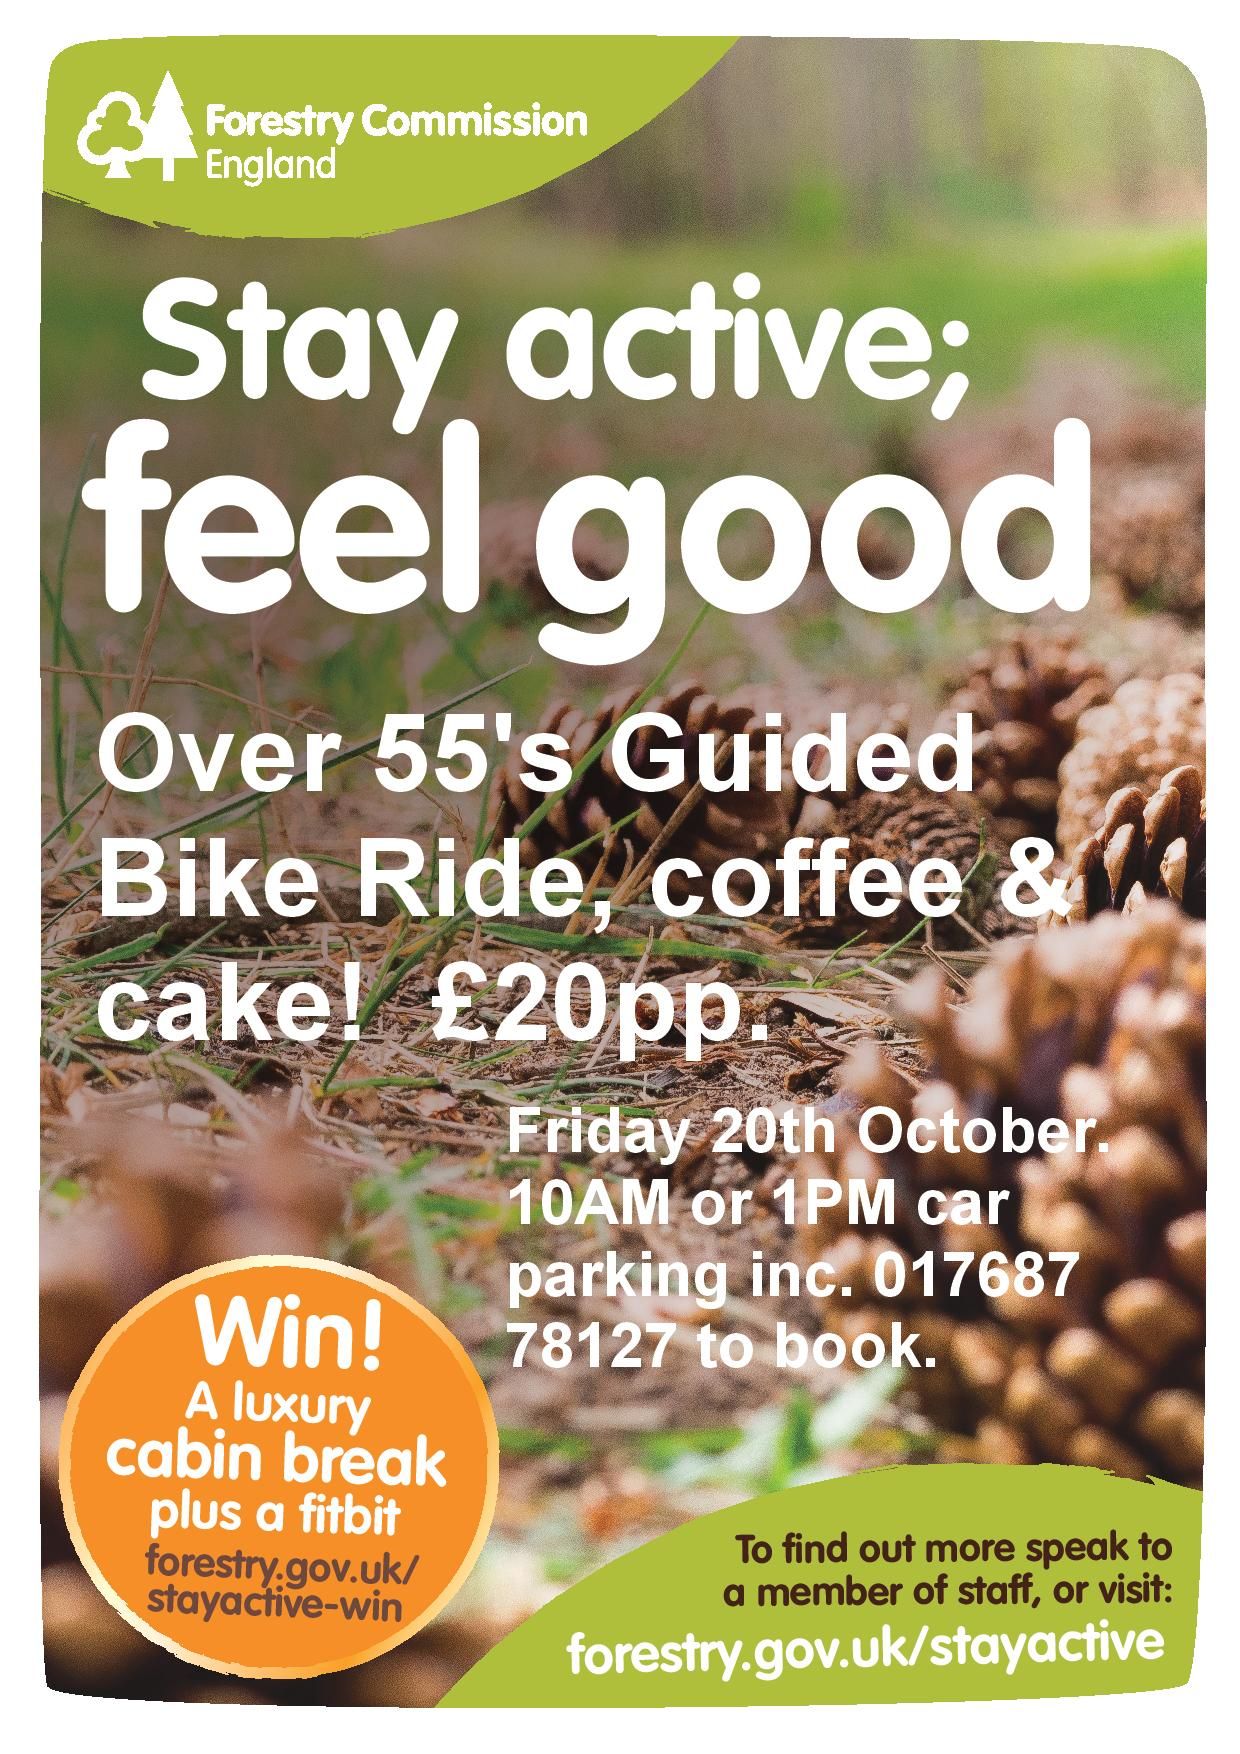 Over 55's Guided Bike Ride 